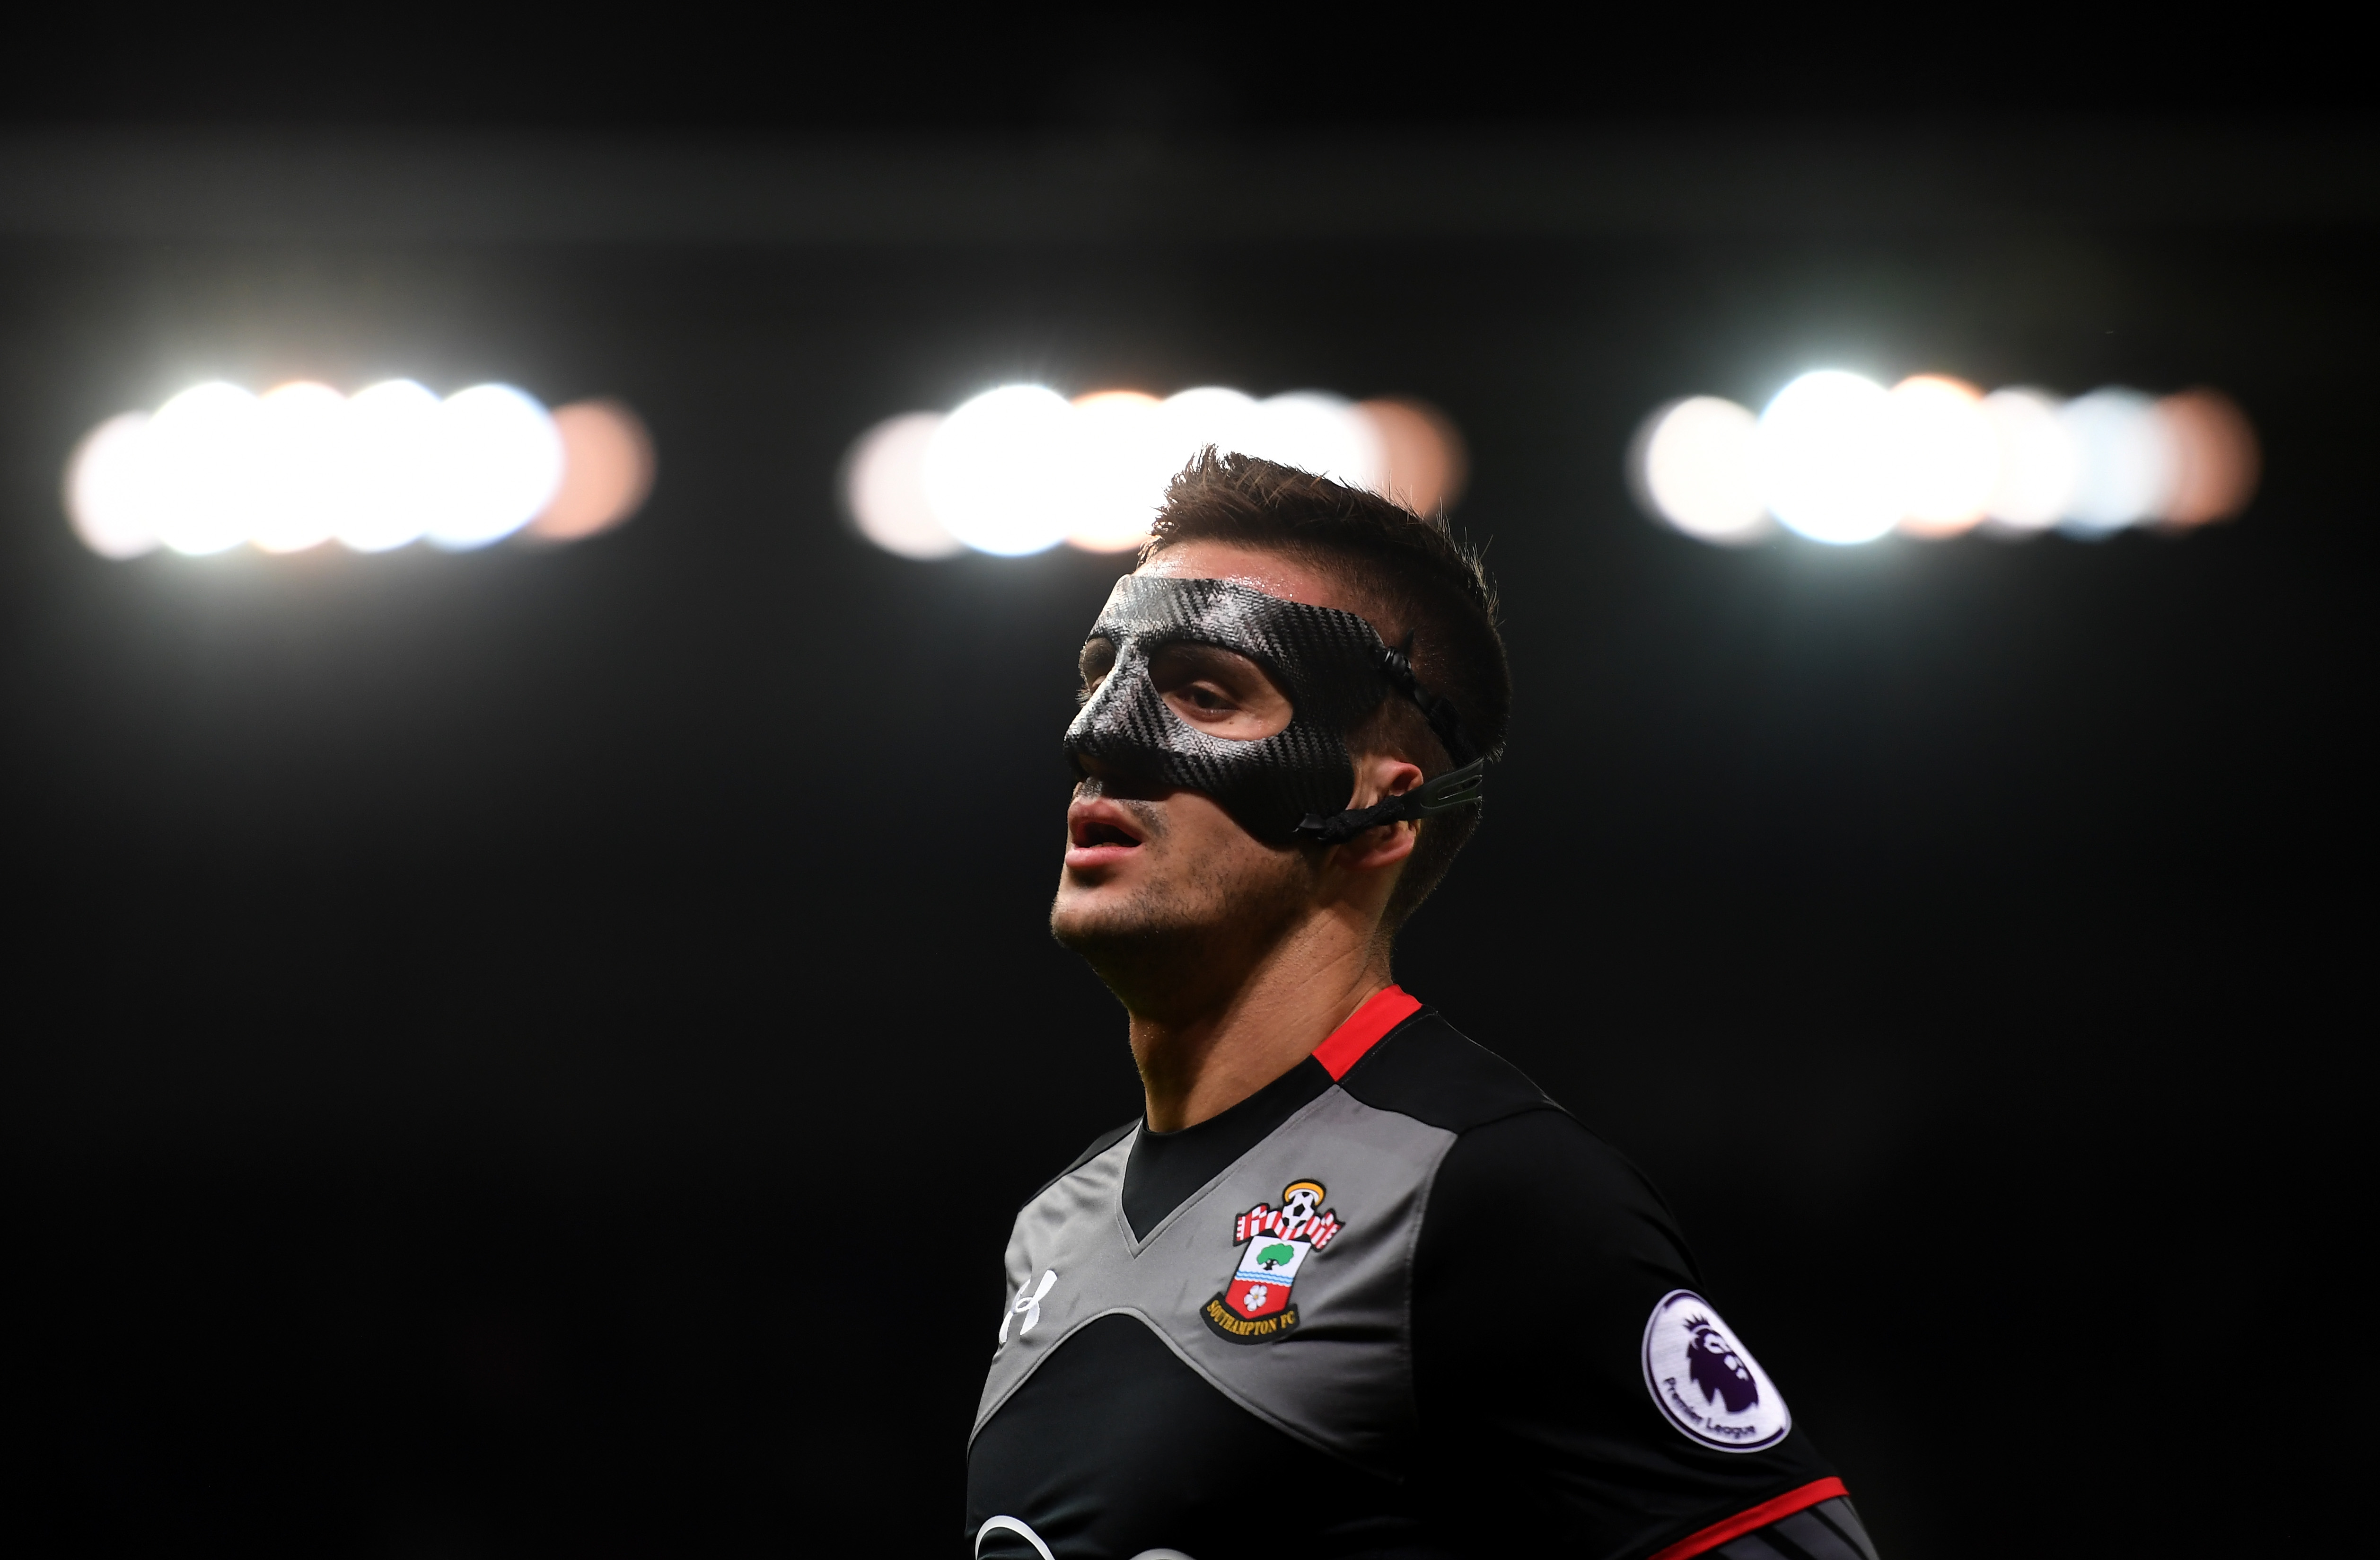 STOKE ON TRENT, ENGLAND - DECEMBER 14: Dusan Tadic of Southampton looks on during the Premier League match between Stoke City and Southampton at Bet365 Stadium on December 14, 2016 in Stoke on Trent, England.  (Photo by Michael Regan/Getty Images)